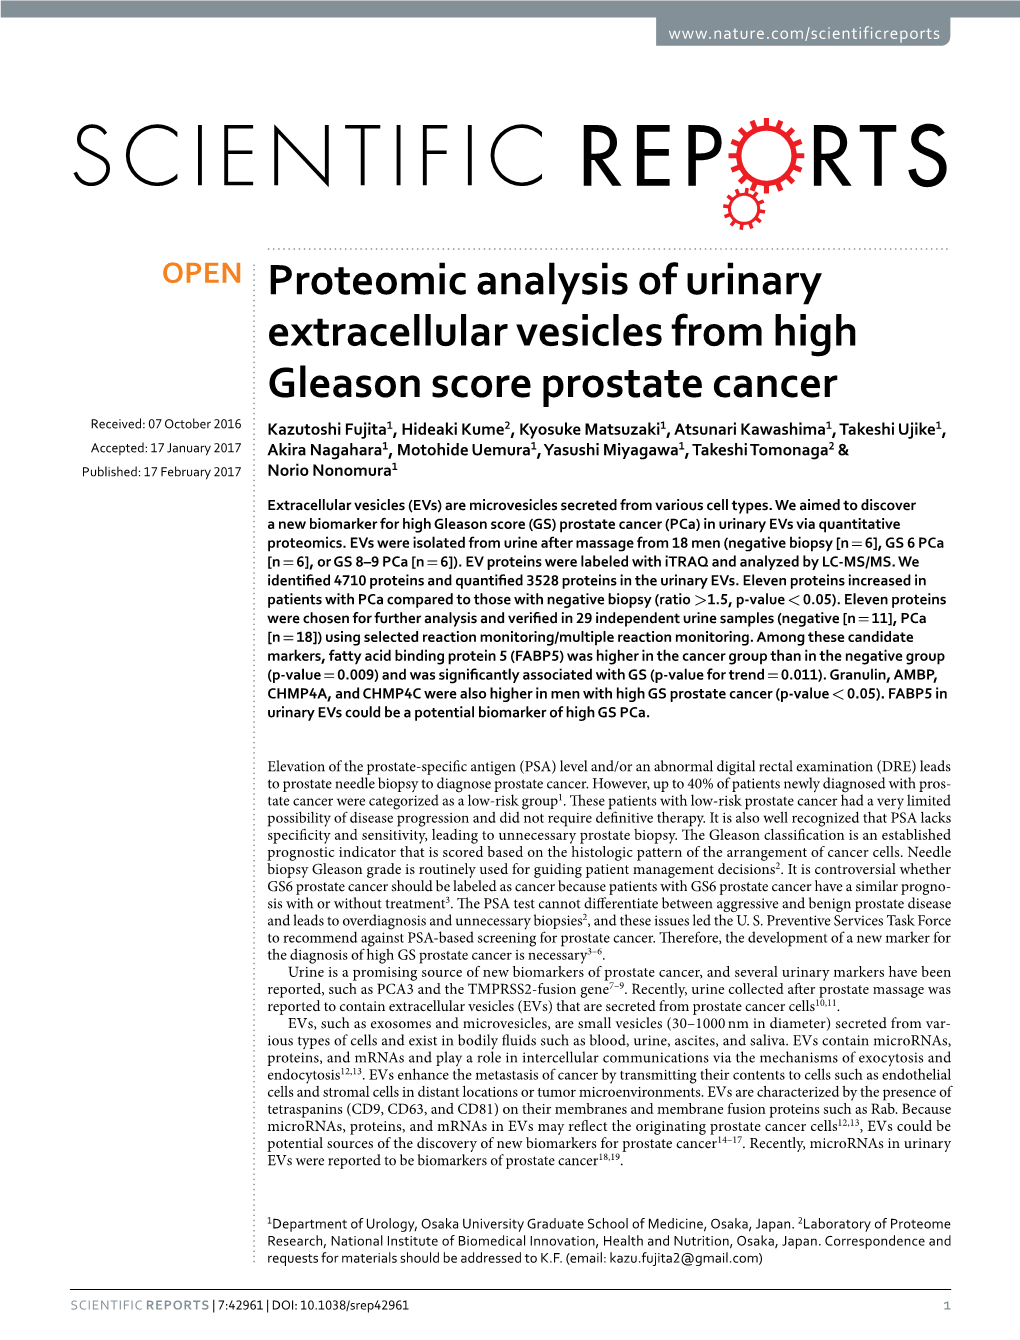 Proteomic Analysis of Urinary Extracellular Vesicles from High